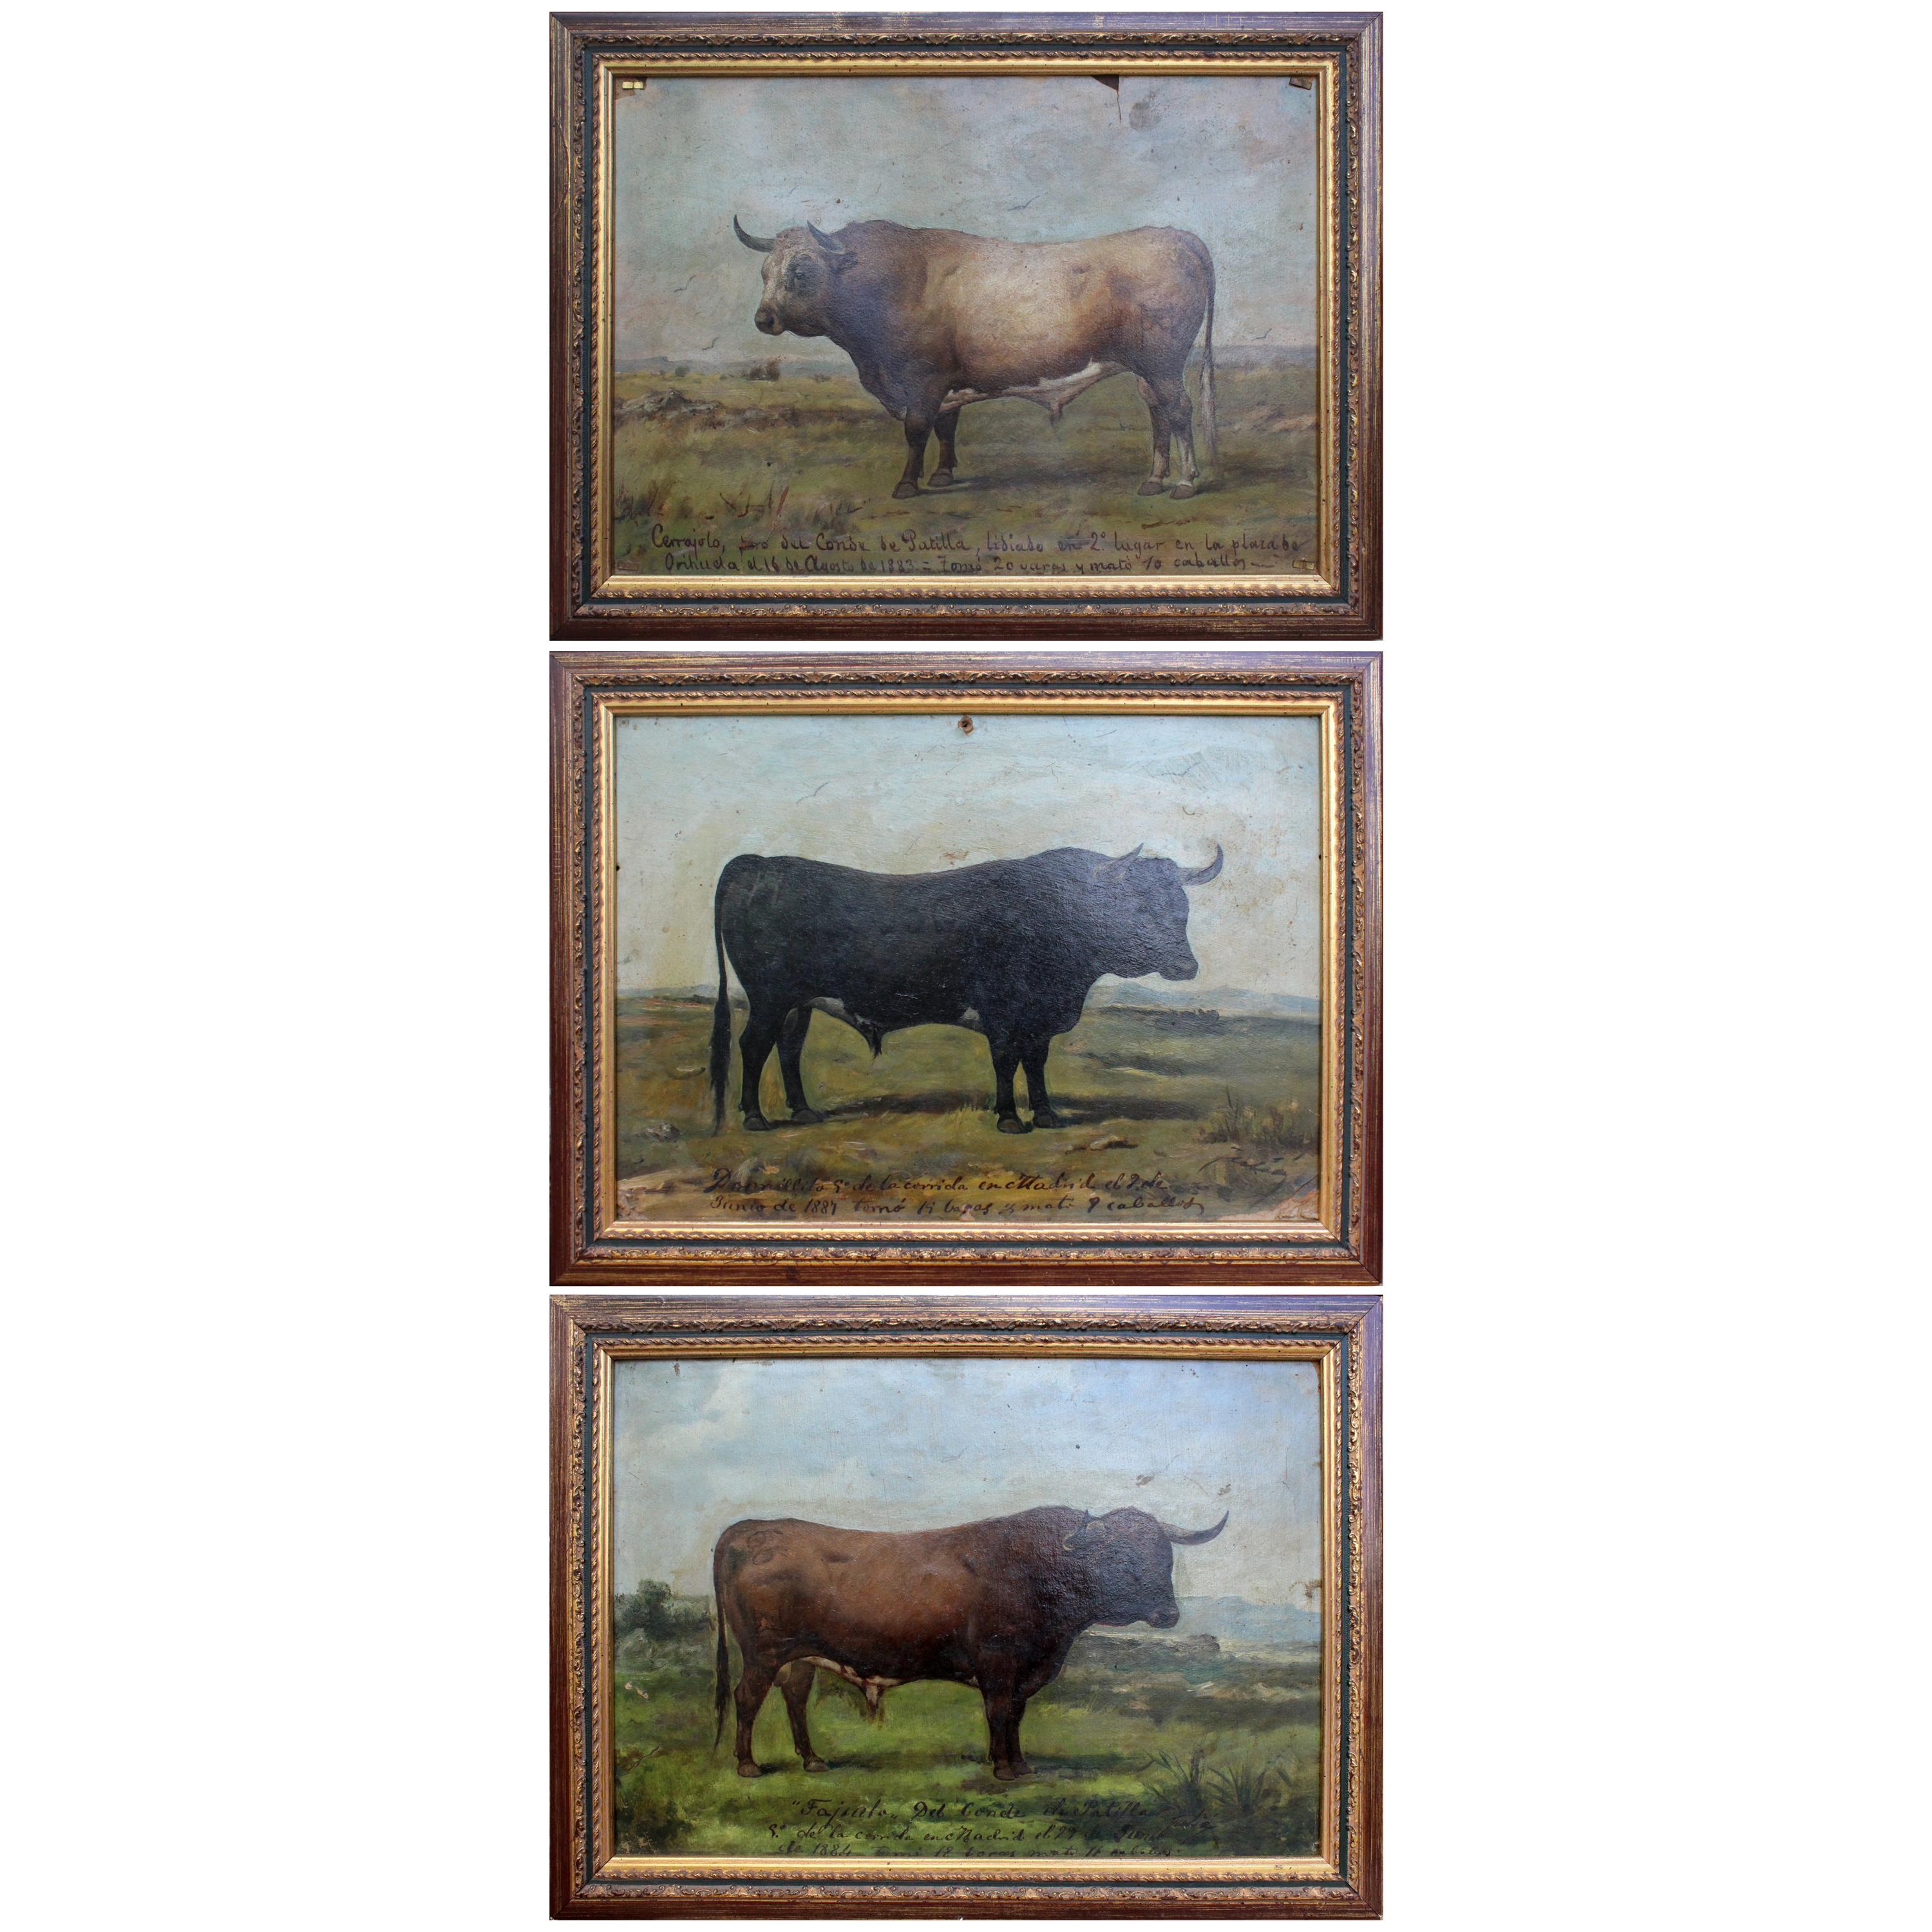 1883 Set of Three Oil on Canvas Bull Portraits by Luis Juliá Carrere